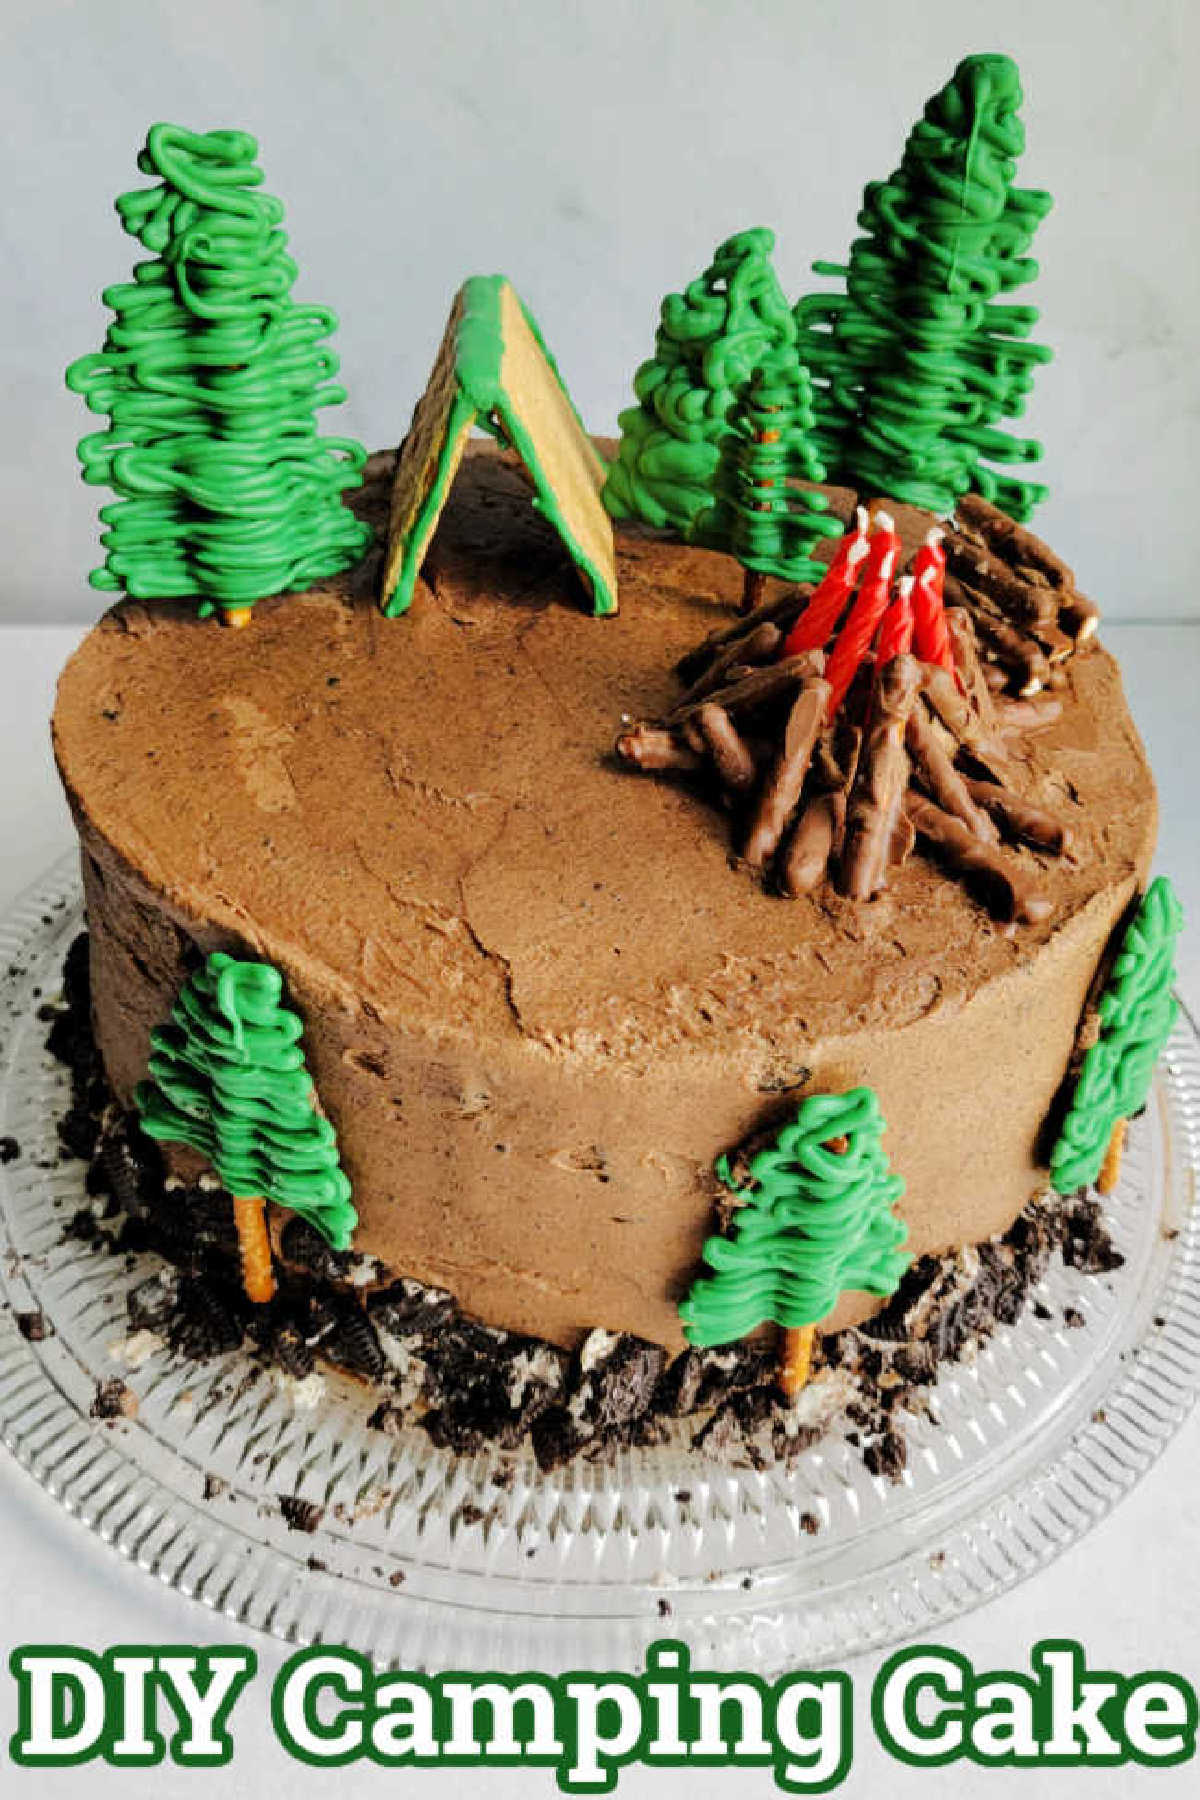 If you ate hosting a lumberjack, outdoor or camping themed party, this easy DIY camping cake is the perfect dessert. It made for a cute birthday cake that was easy to make at home with very few cake decorating skills.